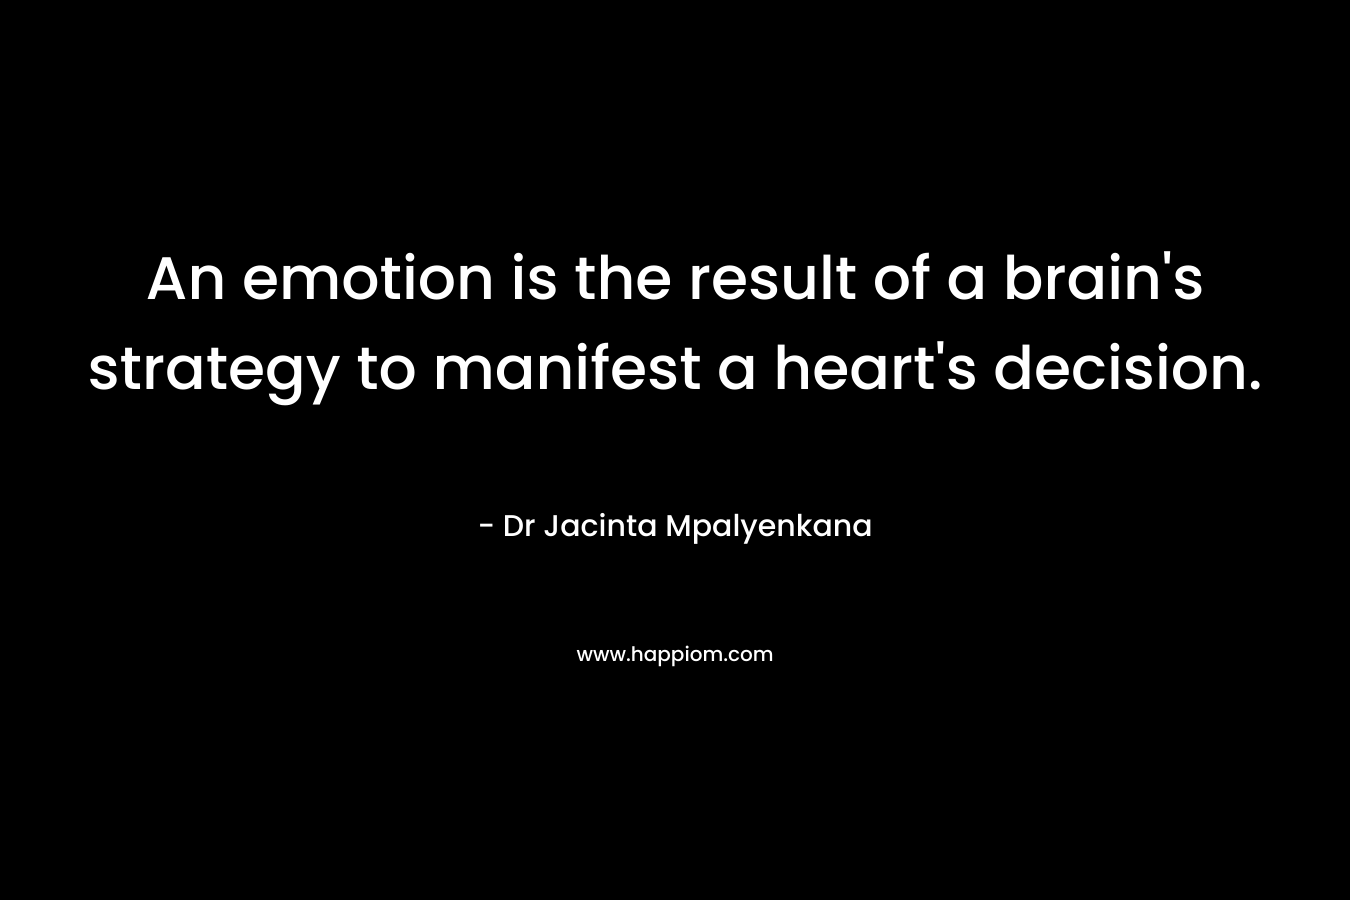 An emotion is the result of a brain's strategy to manifest a heart's decision.